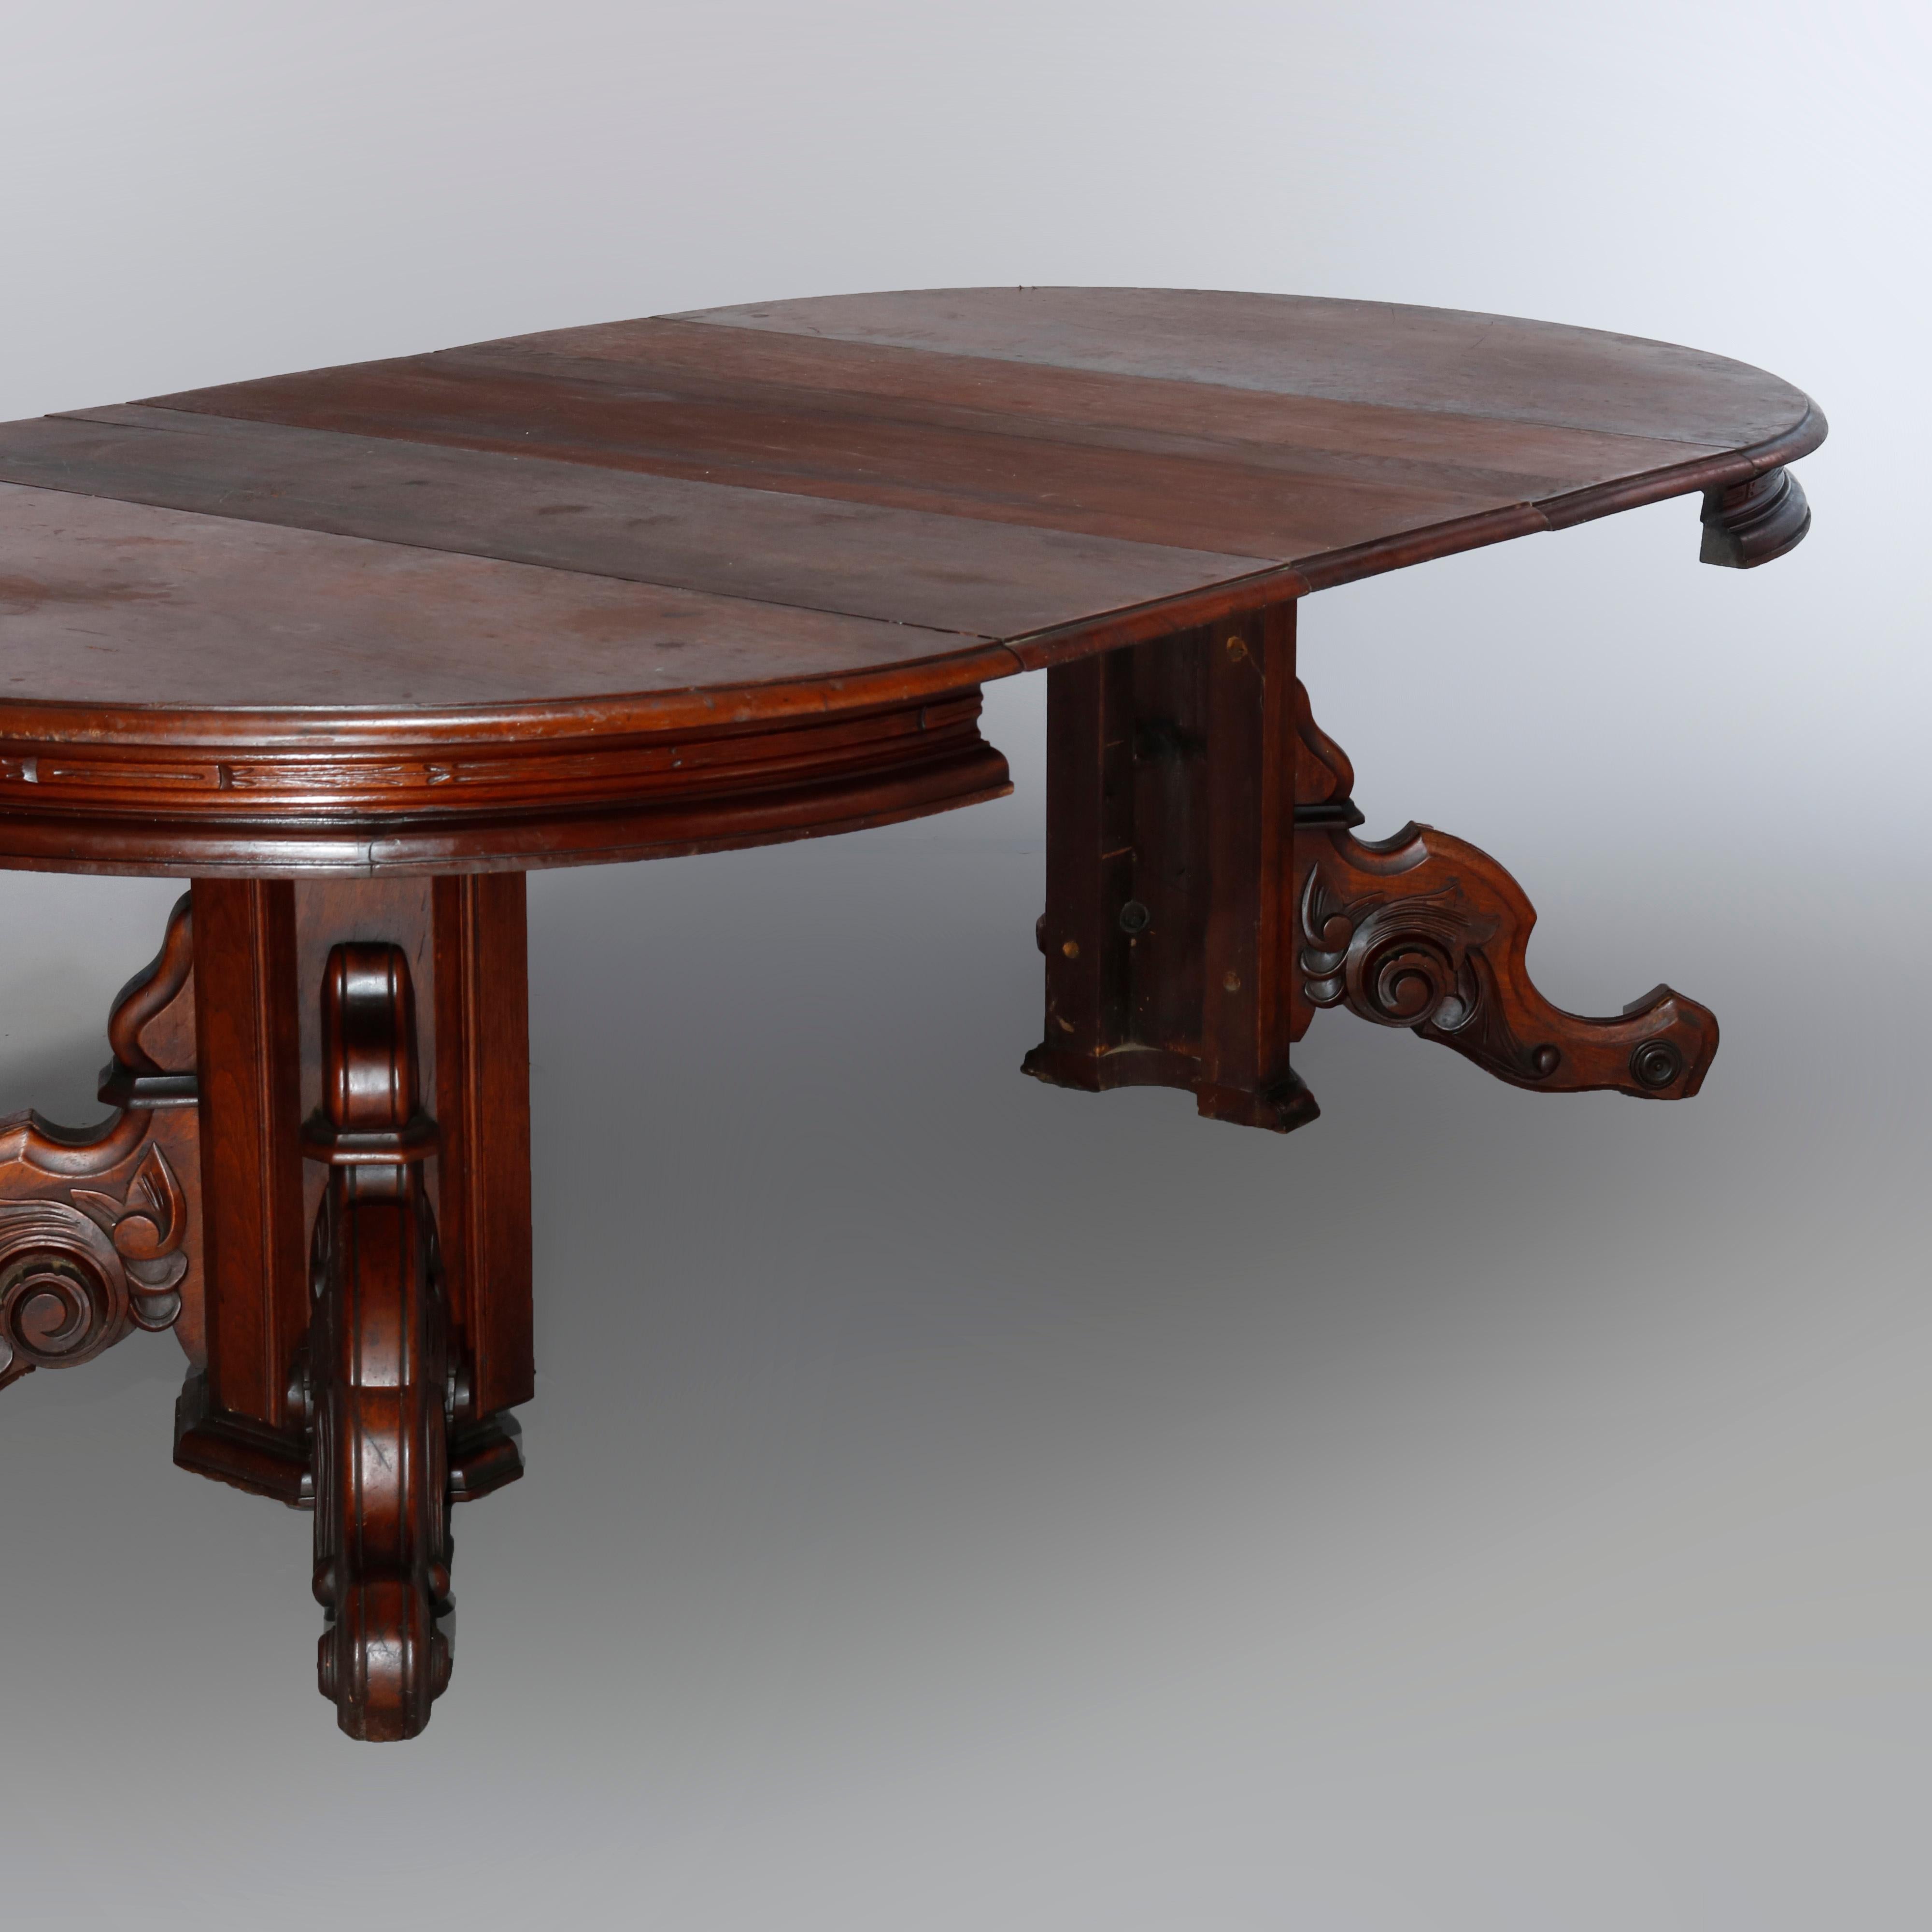 Antique Renaissance Revival Carved Walnut Extension Dining Table & Leaves, c1880 4